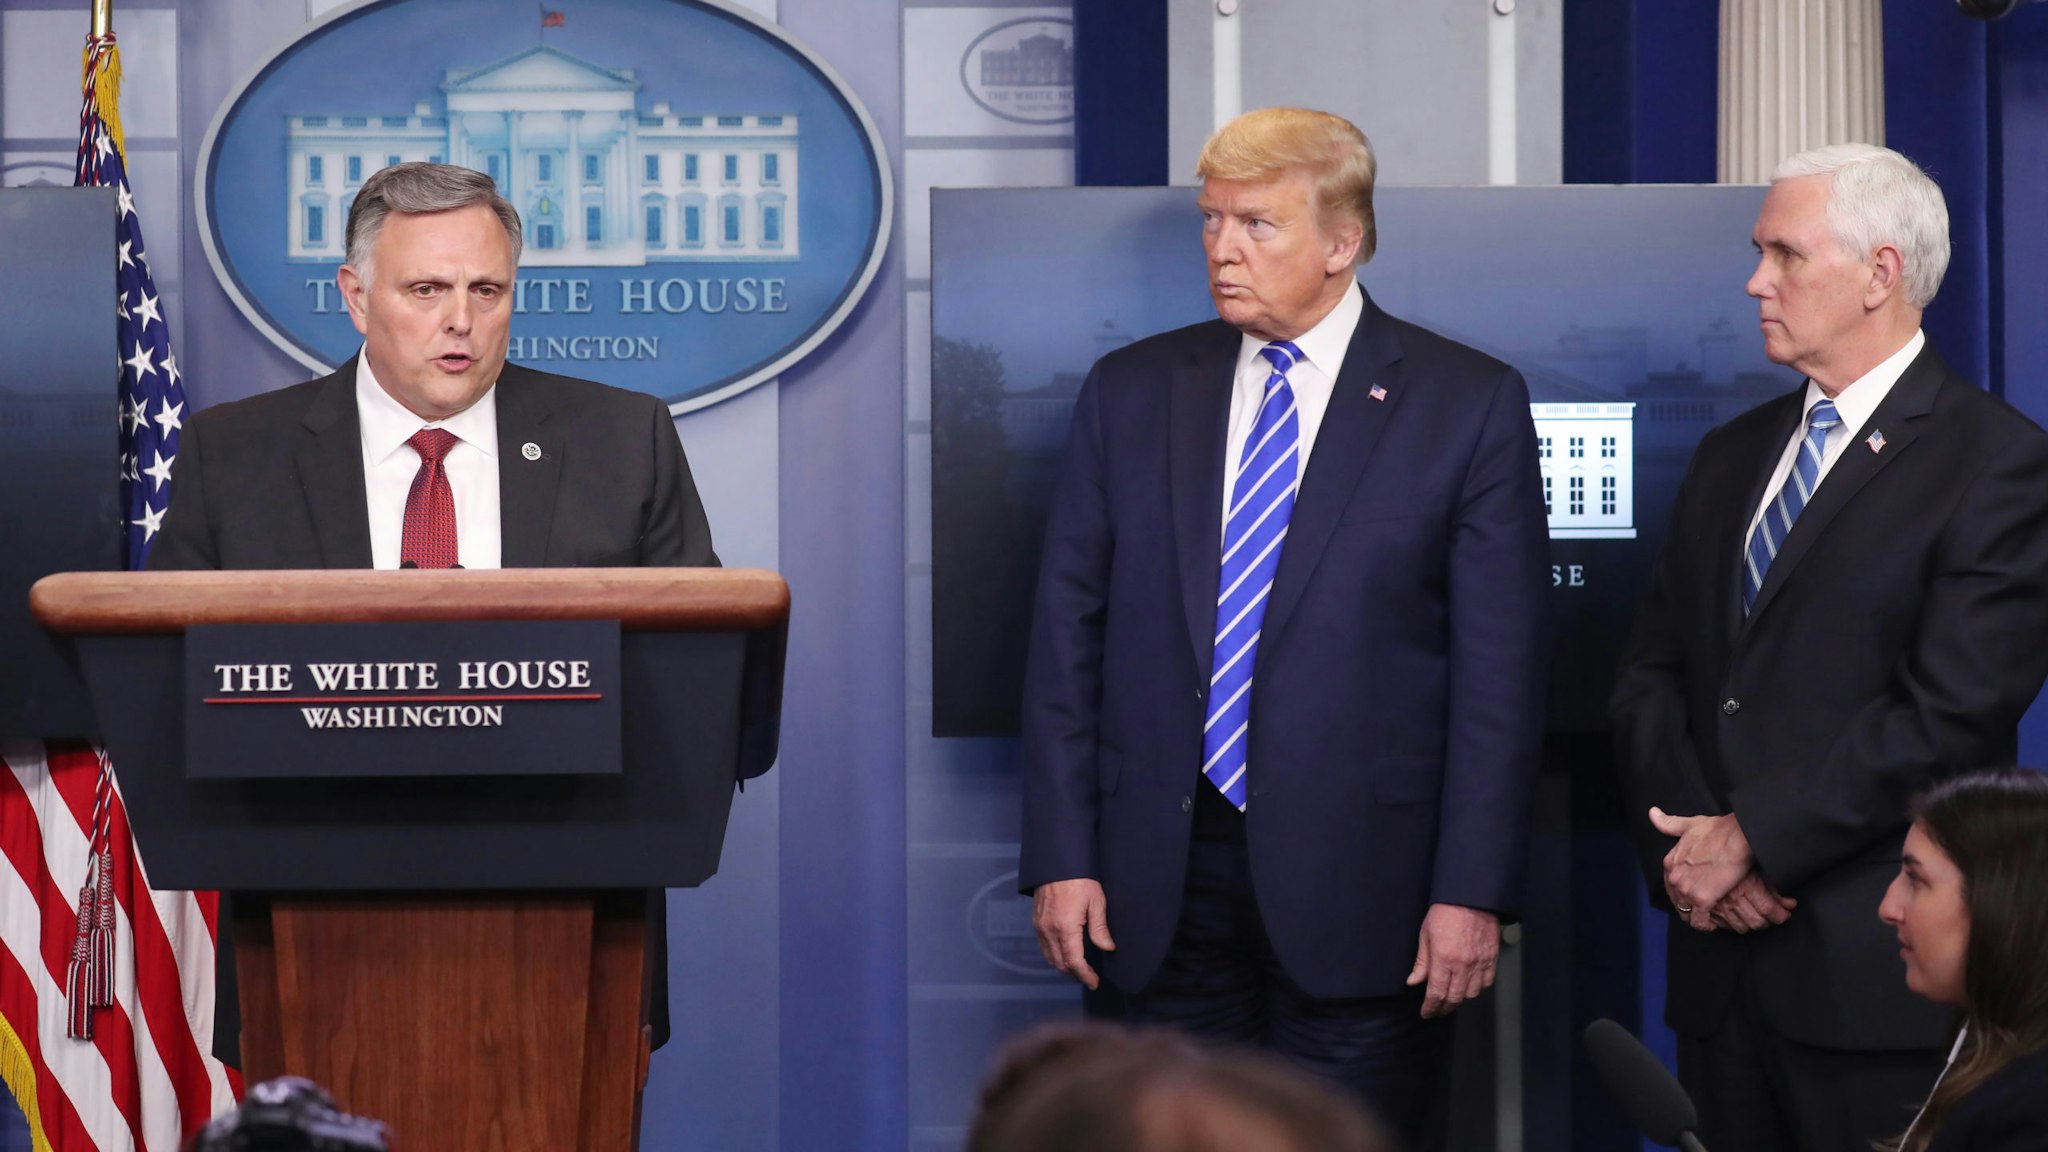 Bill Bryan, senior official performing the duties of the under secretary for Science and Technology at Homeland Security, left, speaks as U.S. President Donald Trump, center, and Vice President Mike Pence listen during a news conference in the White House in Washington, D.C., U.S., on Thursday, April 23, 2020. Trumps handling of the coronavirus pandemic and the economic collapse has shaken voters confidence in him, with the percentage of undecided voters more than doubling in the last two weeks.